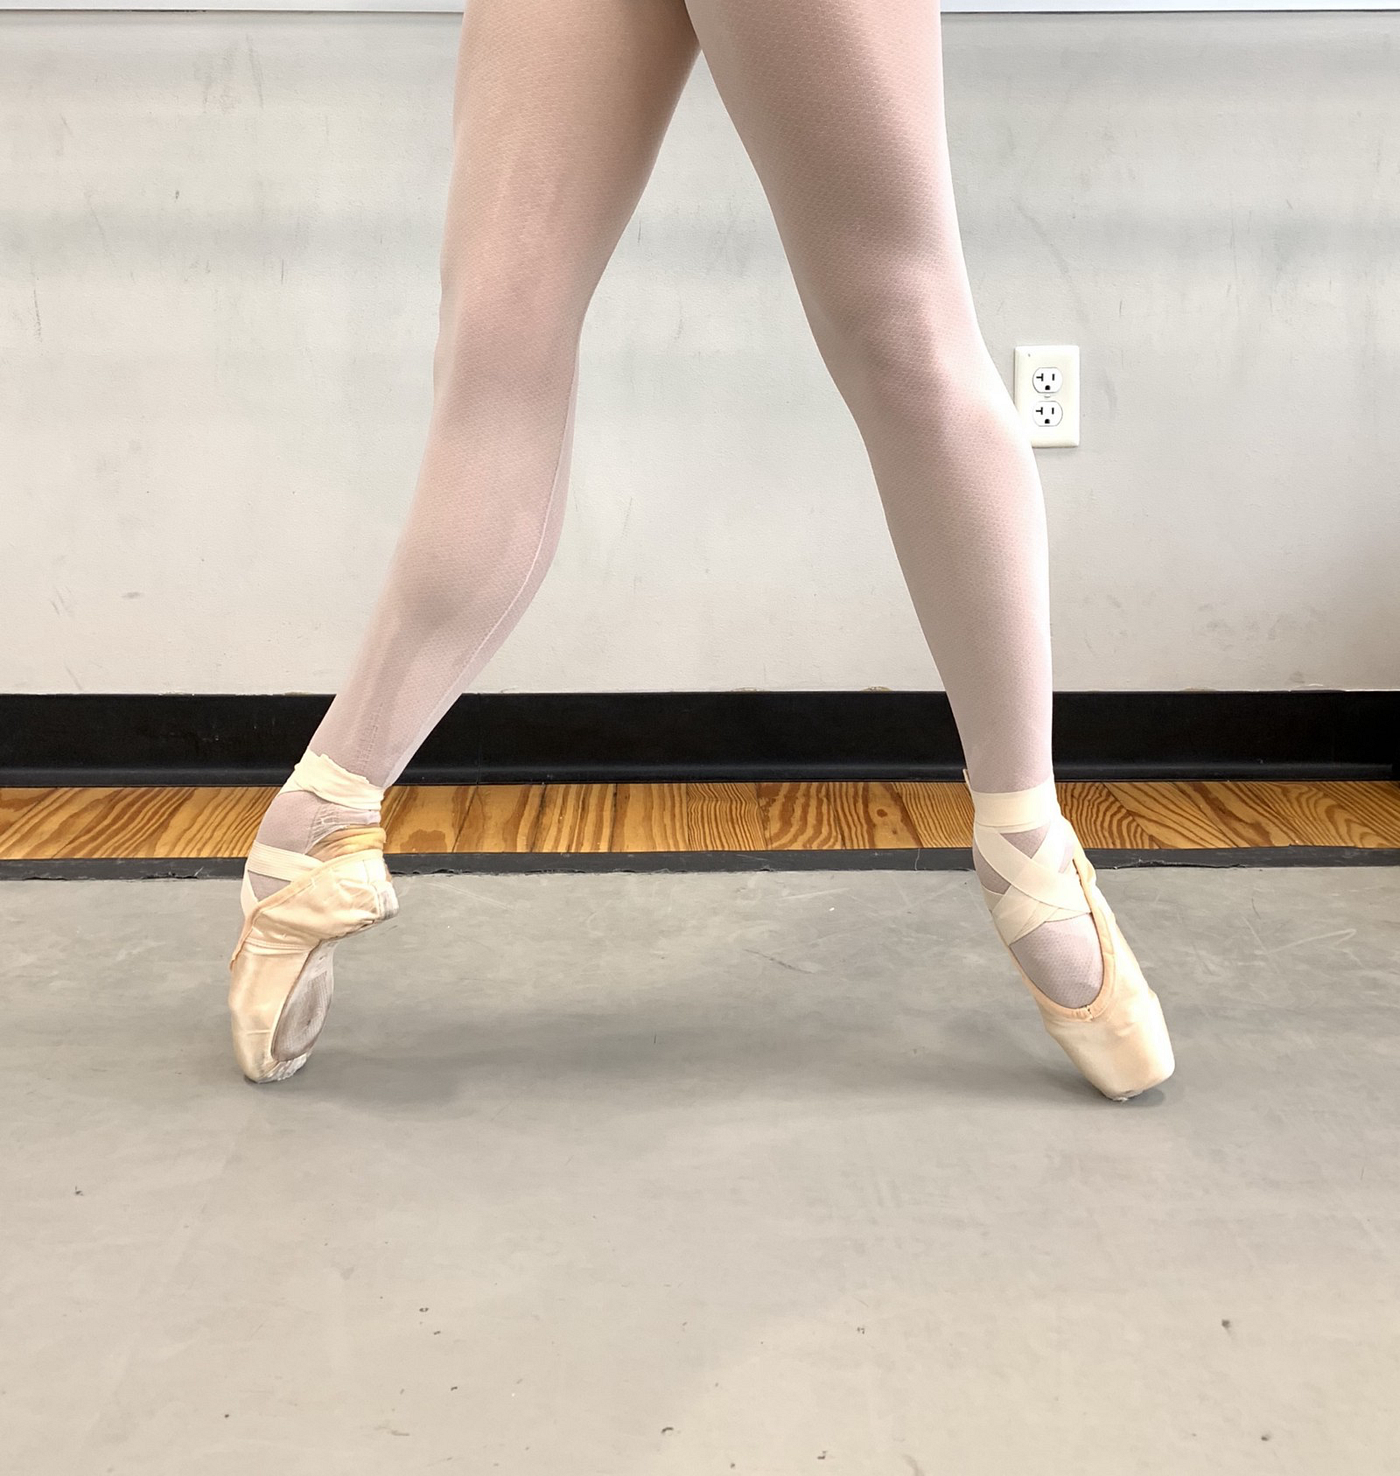 To the The special shoes that help ballerinas dance their toes | by Ballet | Medium